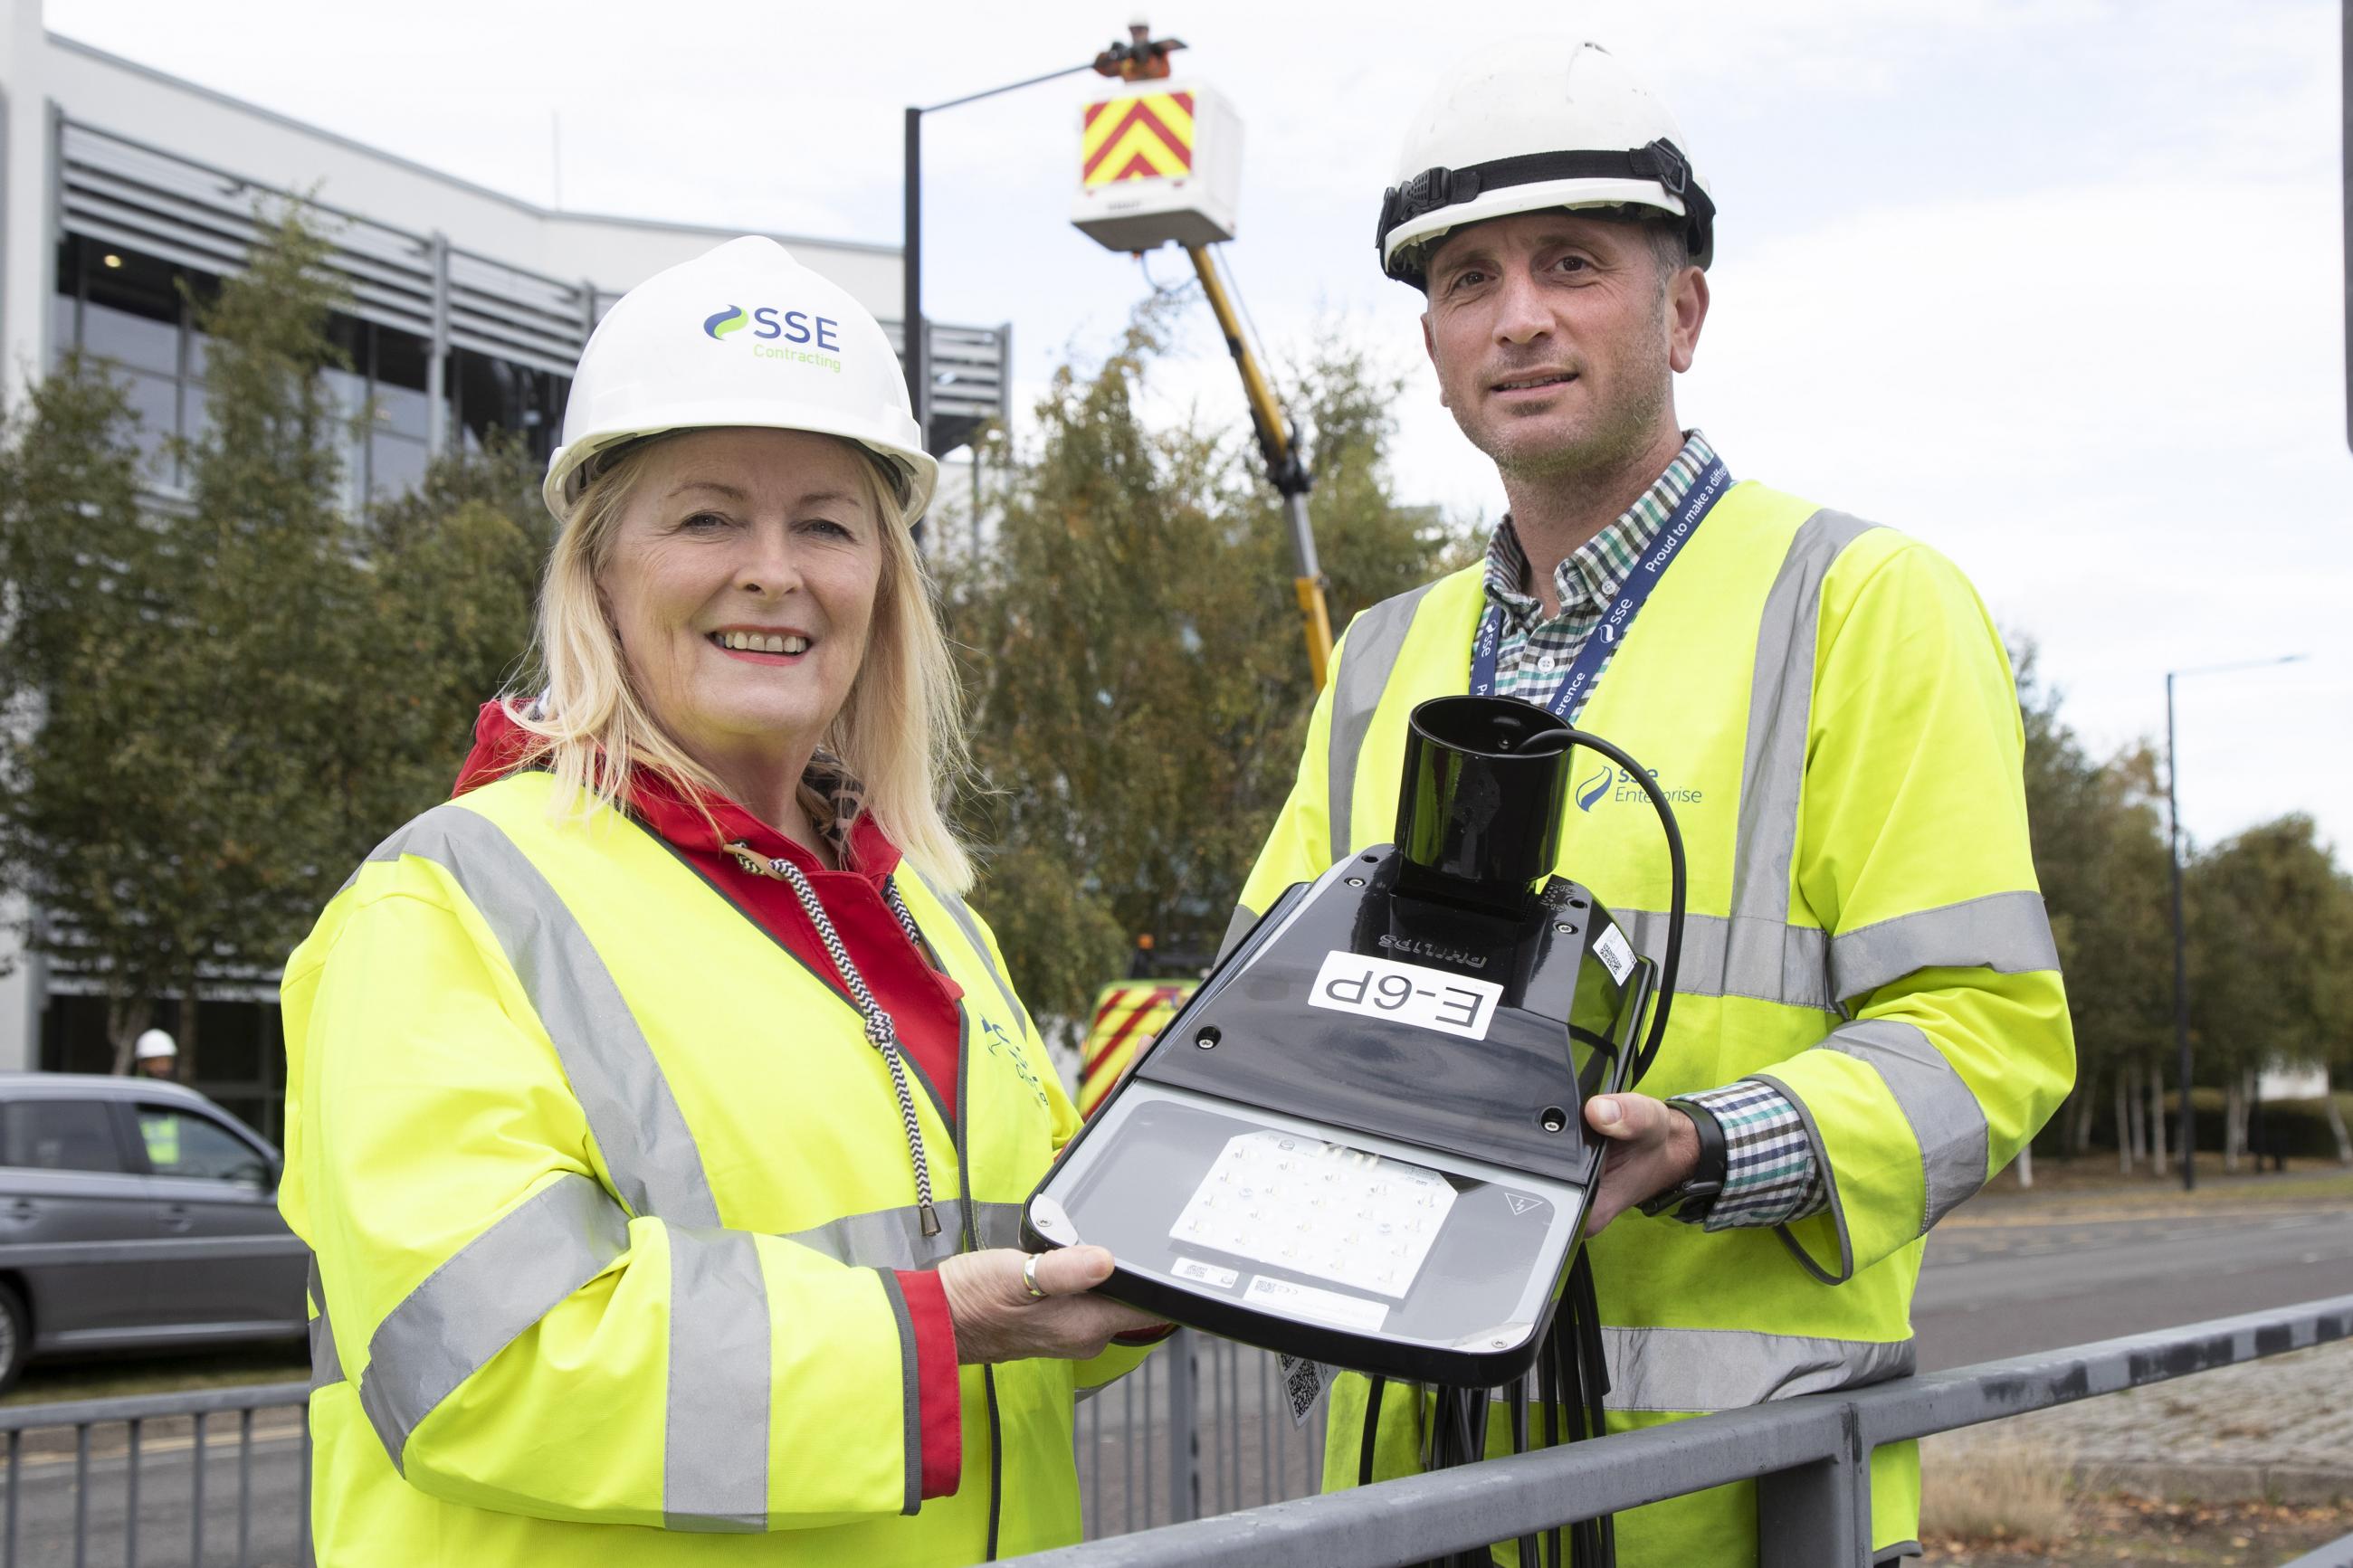 Photograph showing two people in hard hats and high vis jackets holding the lamp for a new street light.